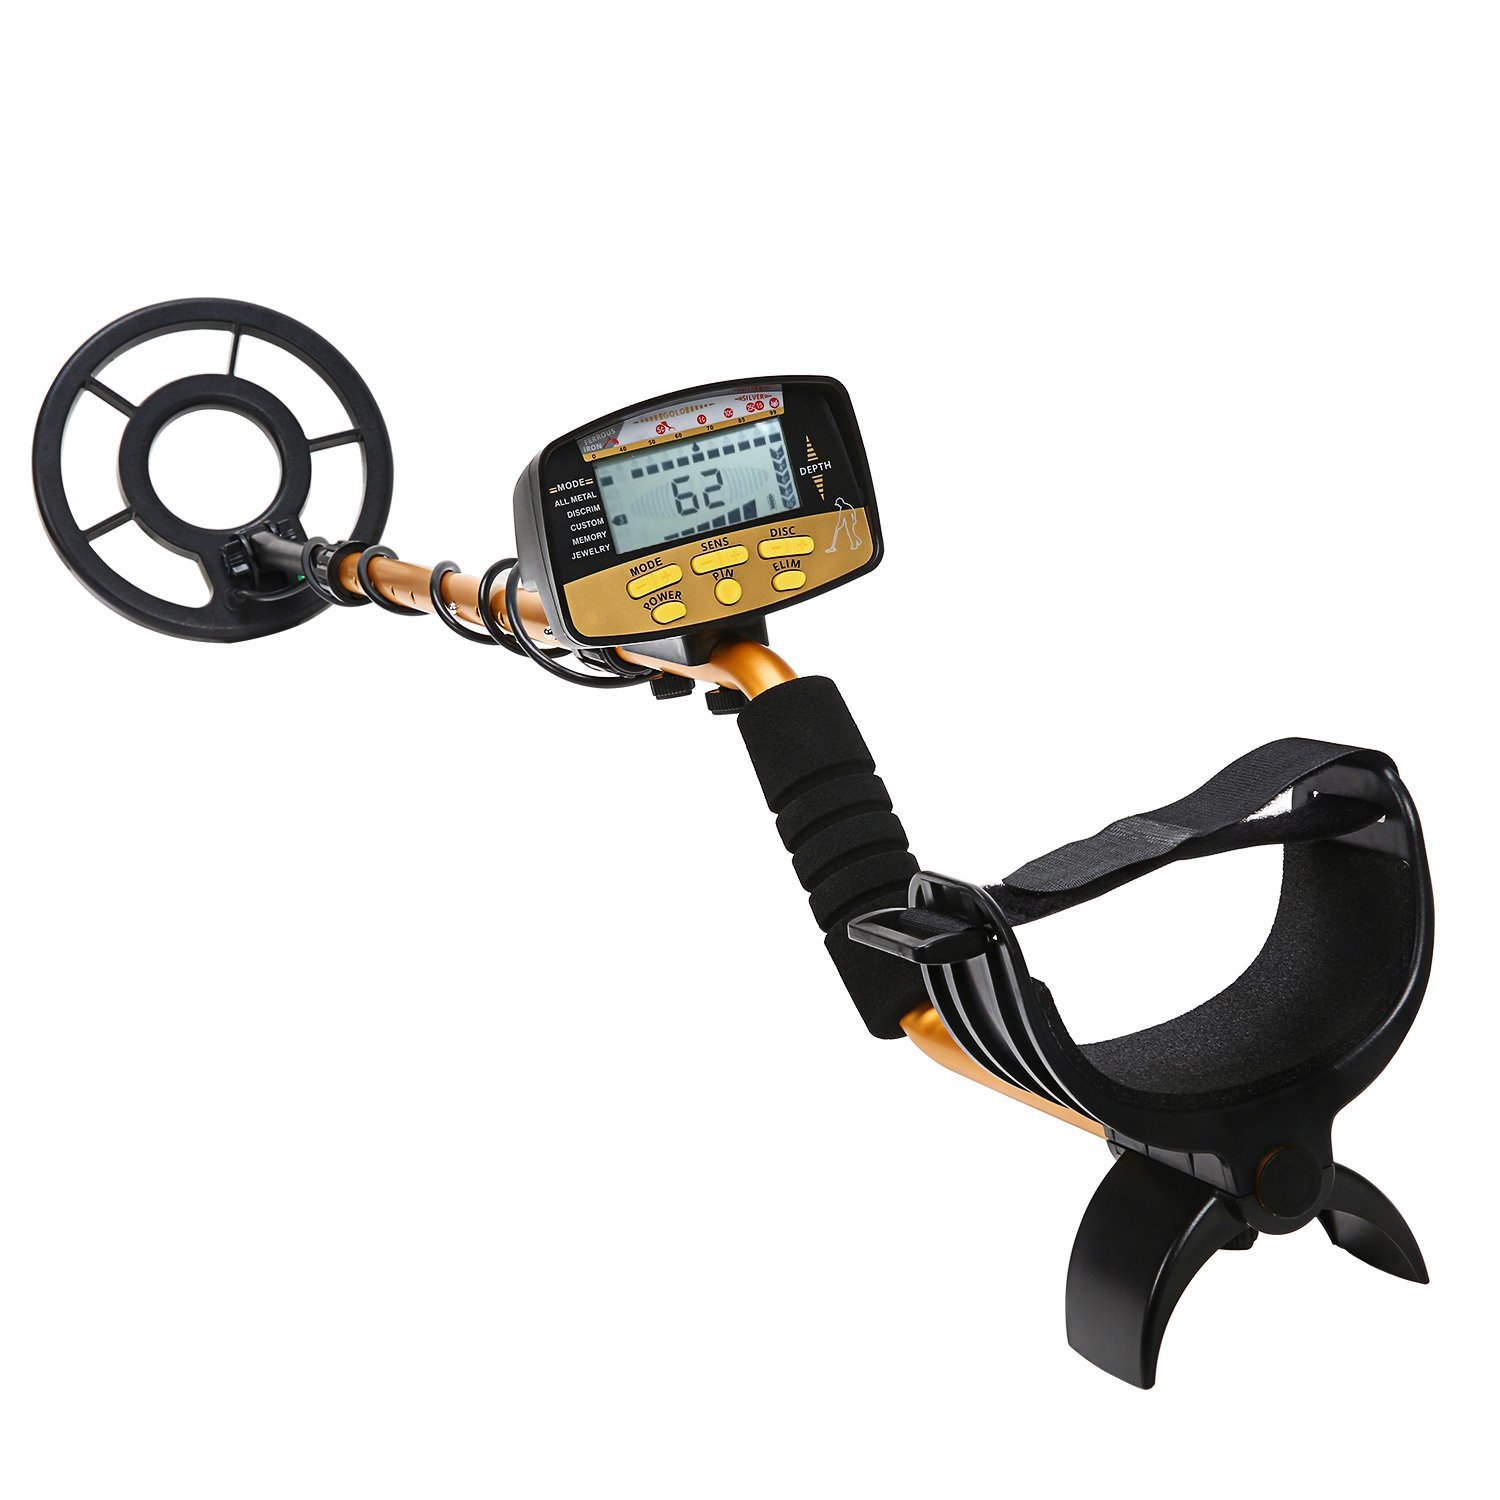 NALANDA Metal Detector, 5 Detection Modes, 18khz Gold Finder Treasure Hunter with Submersible Search Coil